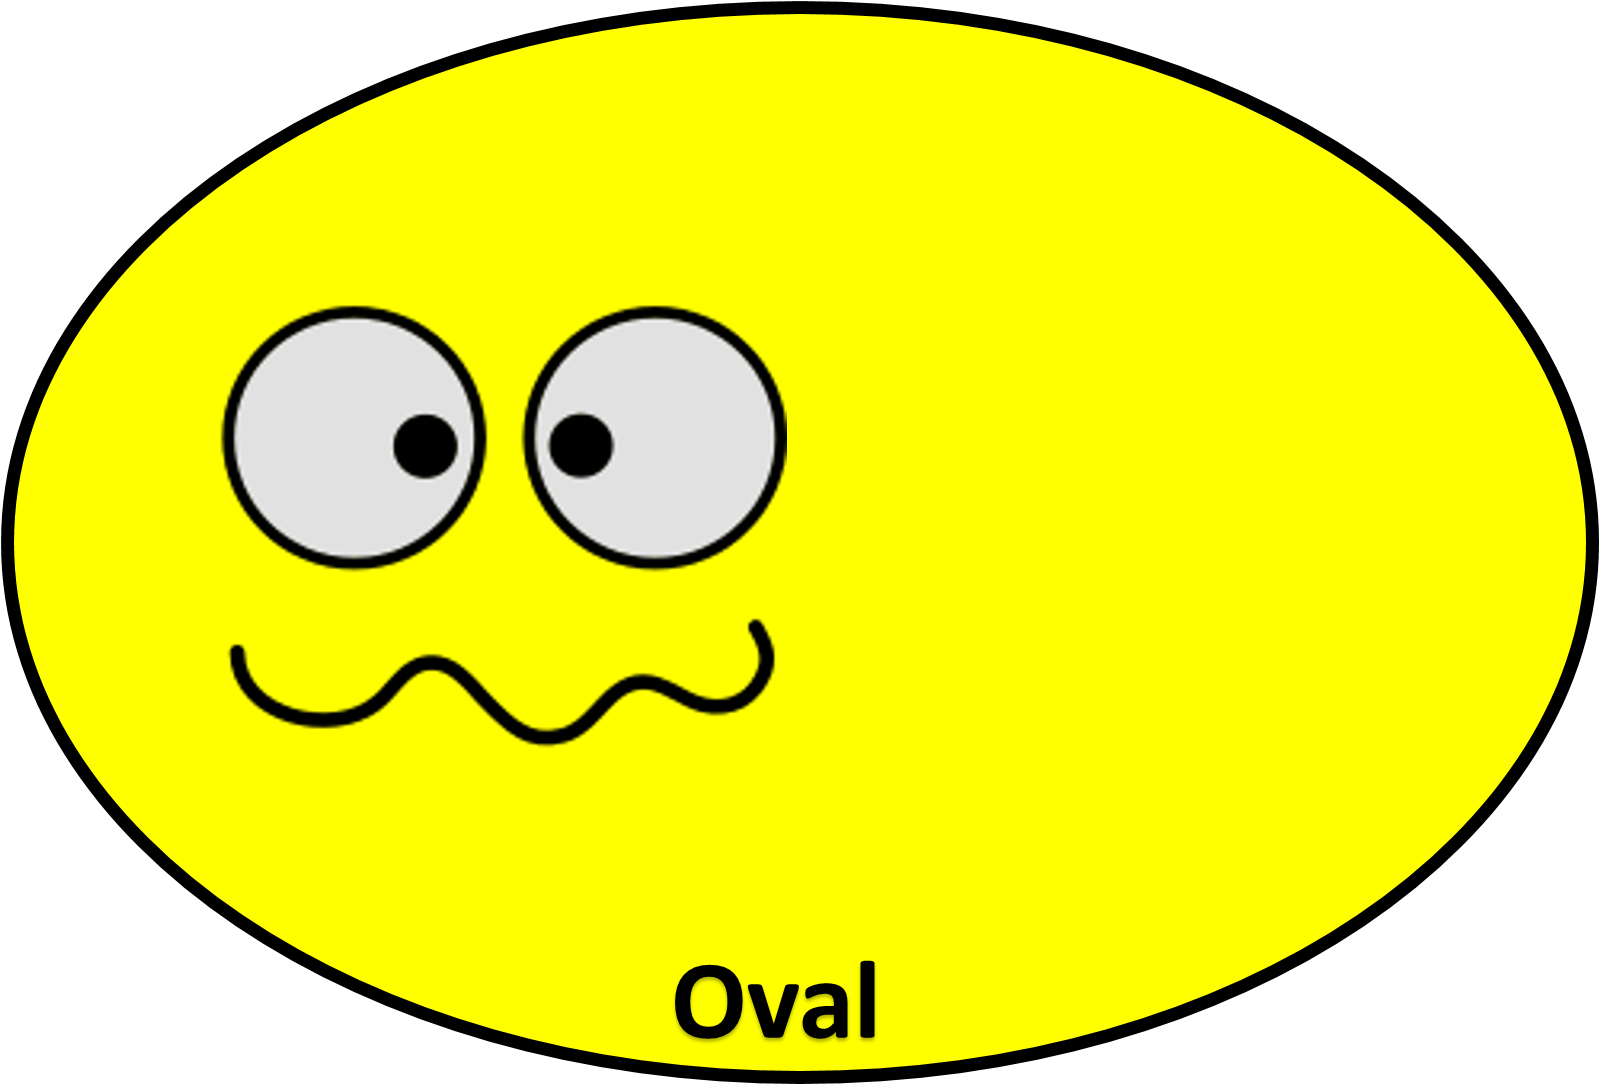 Yellow Oval Cartoon Face PNG image